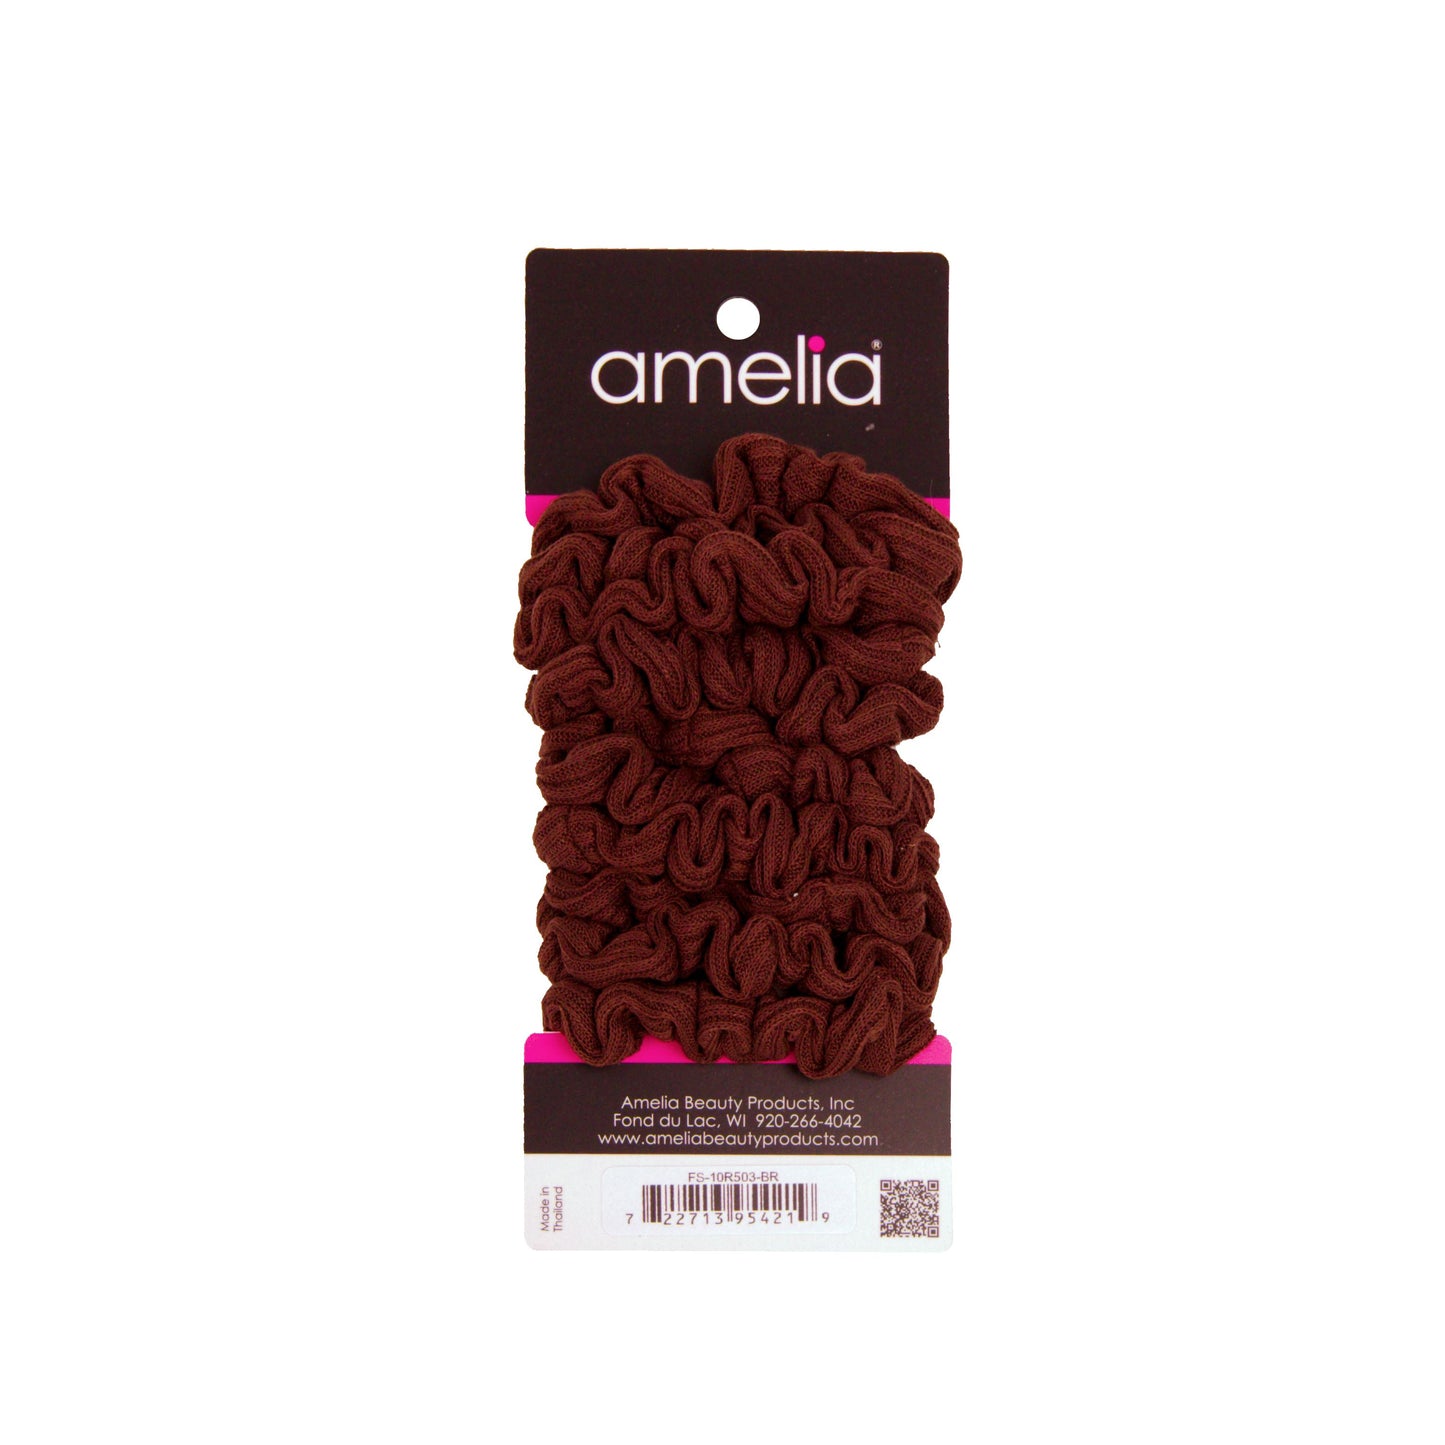 Amelia Beauty, Medium Brown Ribbed Scrunchies, 2.5in Diameter, Gentle on Hair, Strong Hold, No Snag, No Dents or Creases. 10 Pack